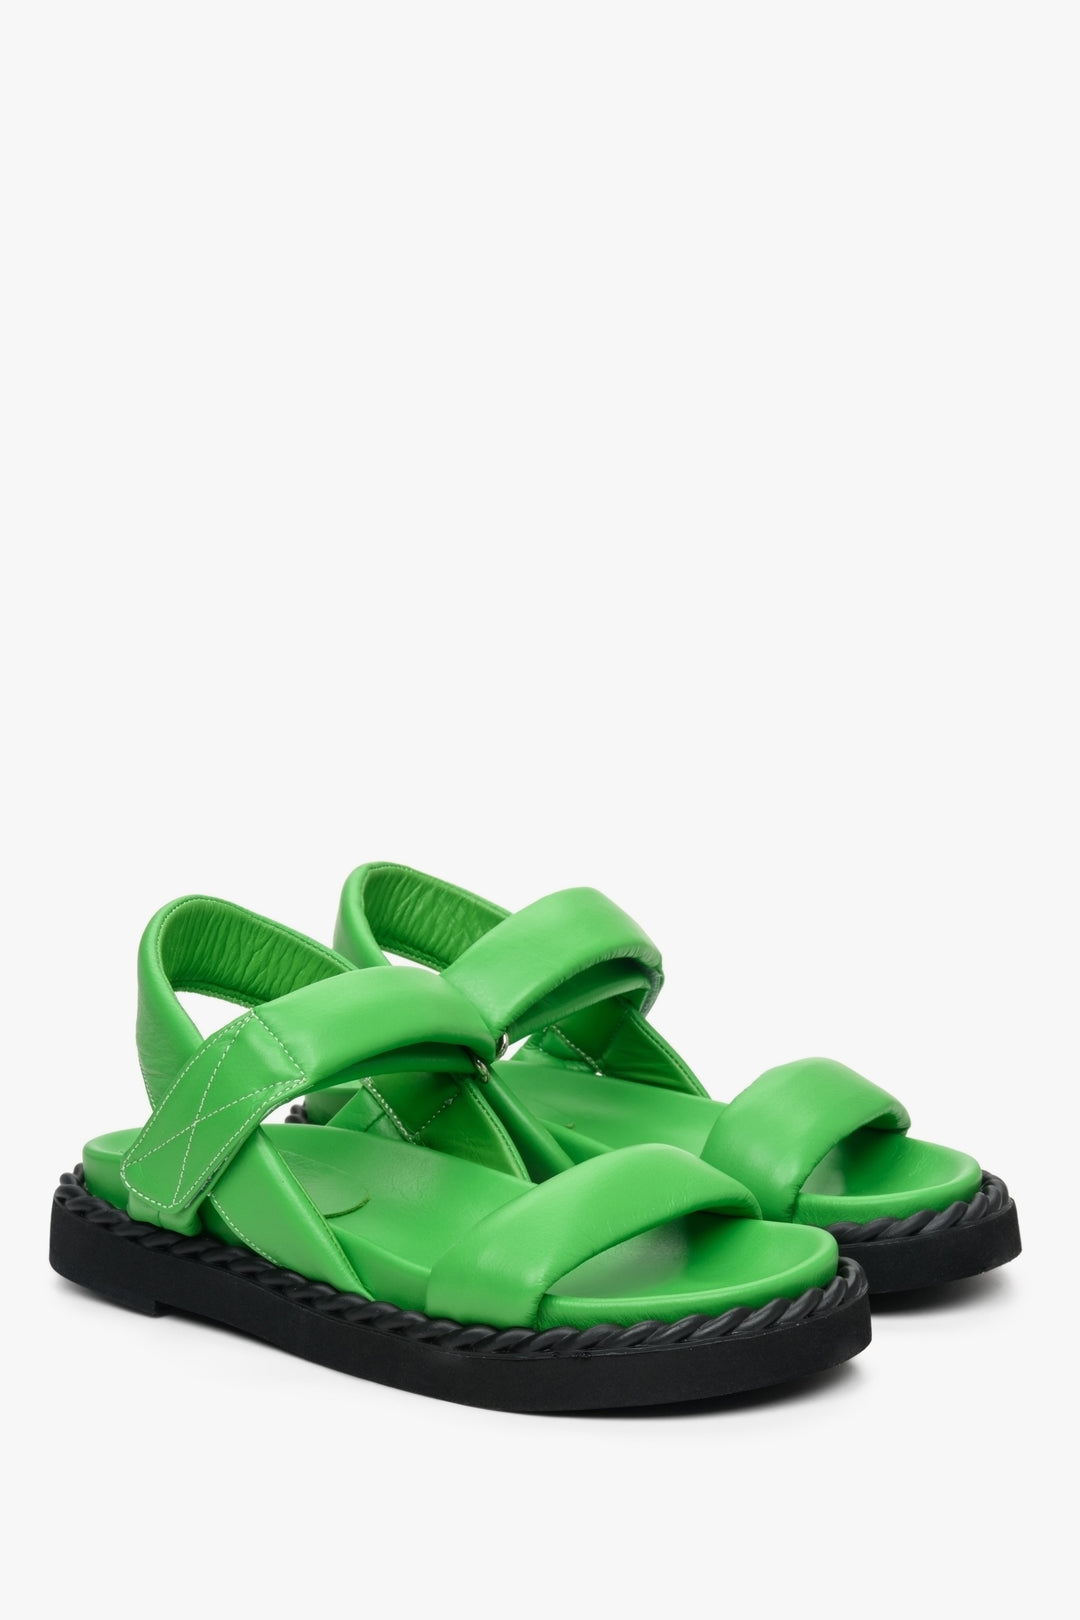 Women's sandals for summer in green colour made of natural leather on a comfortable sole.